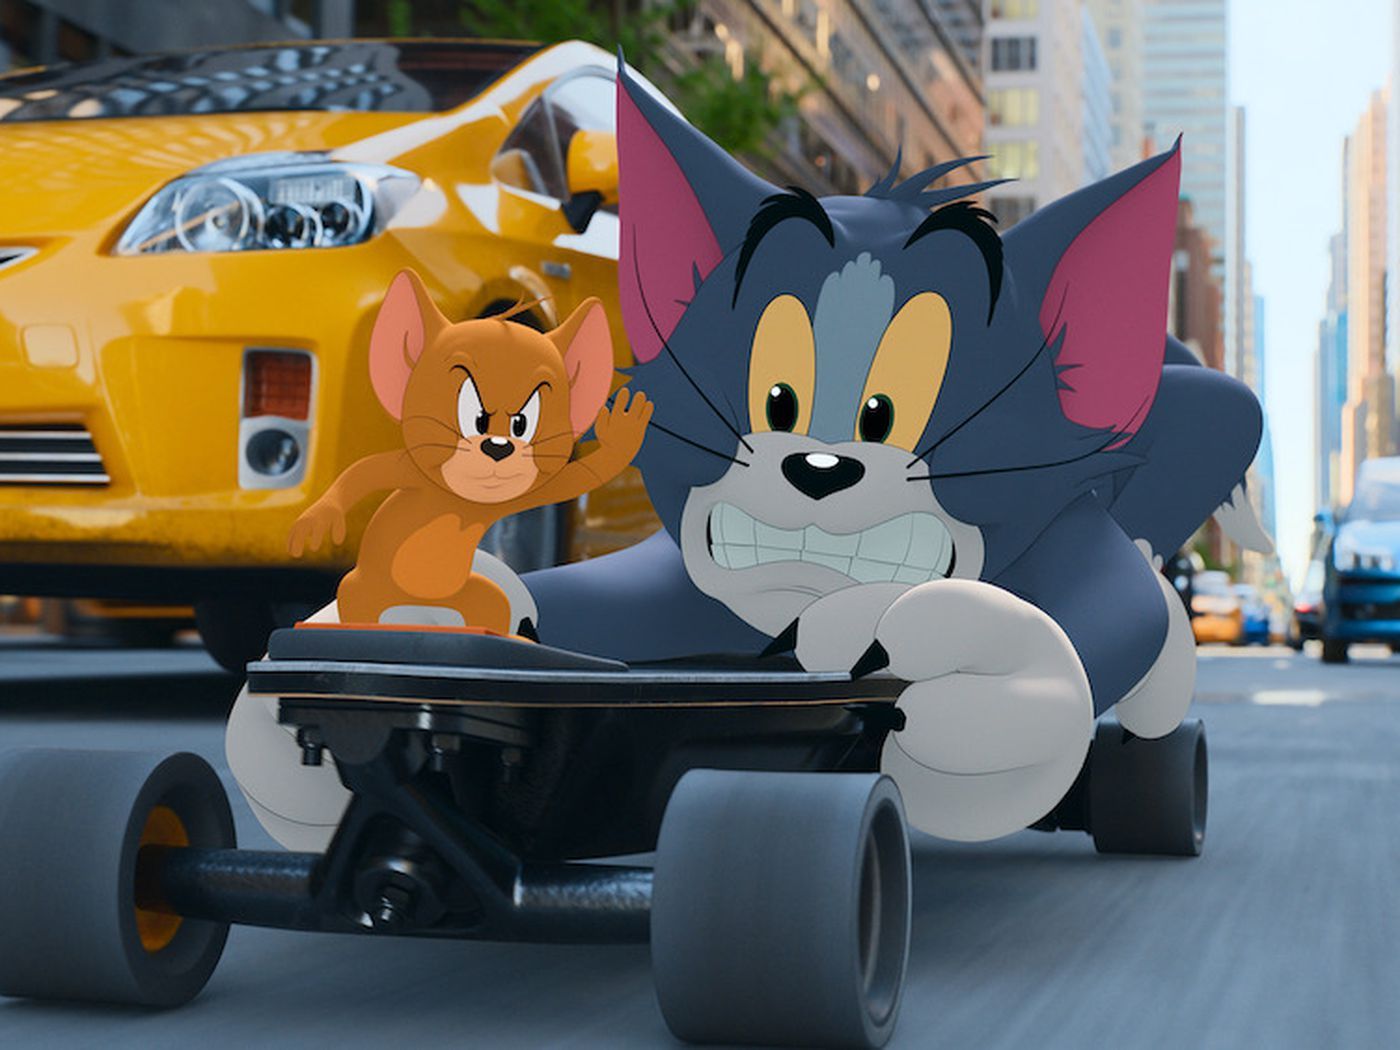 Tom & Jerry Review: 2 Beloved Animated Characters Get Stuck In Live Action